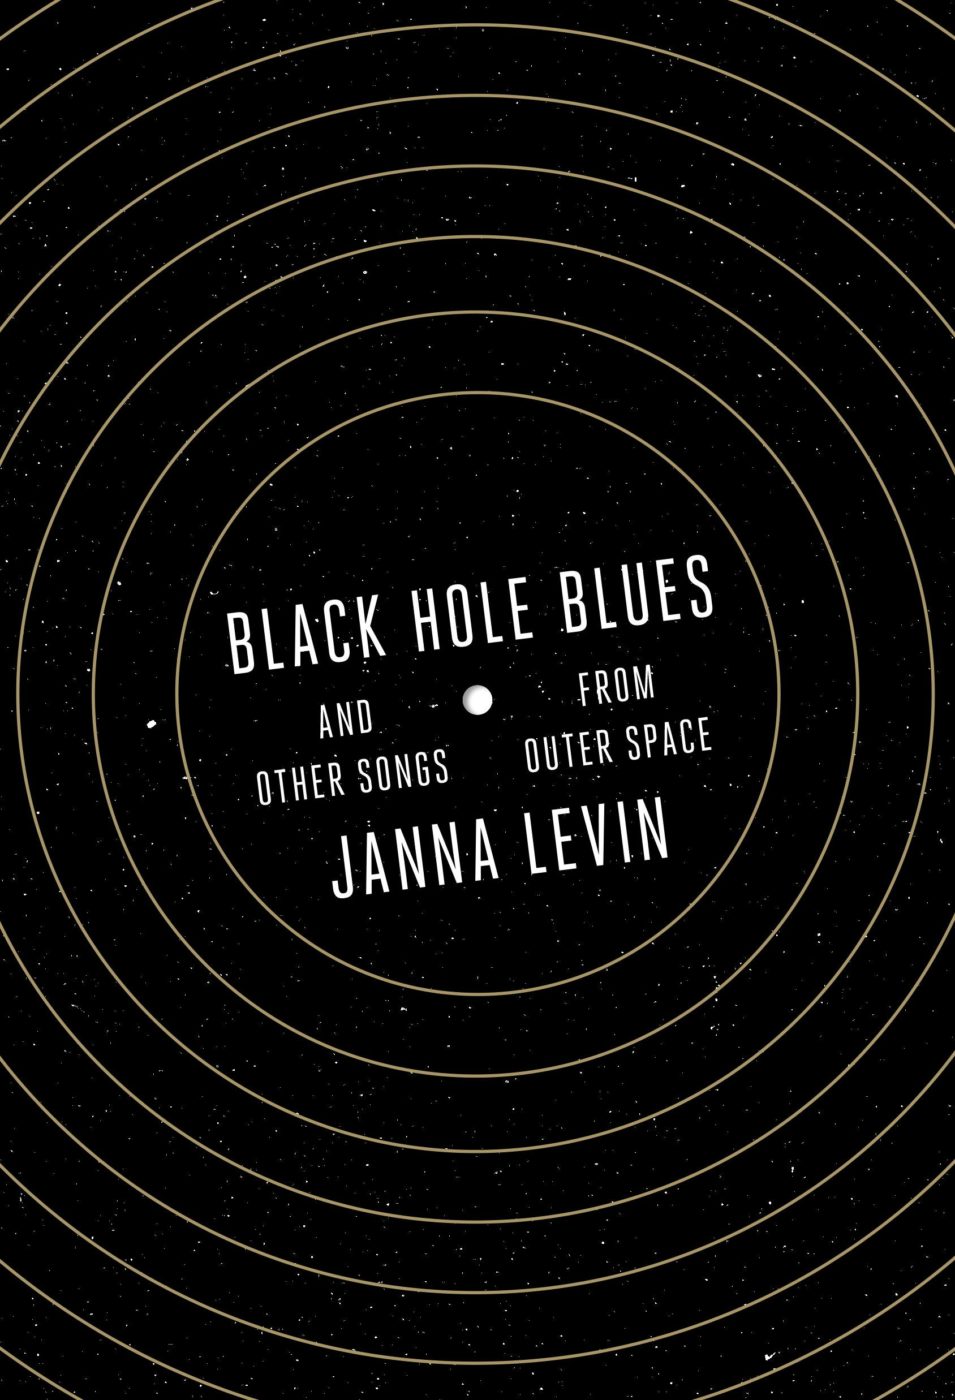 Cover image of "Black Hole Blues and Other Songs from Outer Space" by Janna Levin, courtesy of Amazon